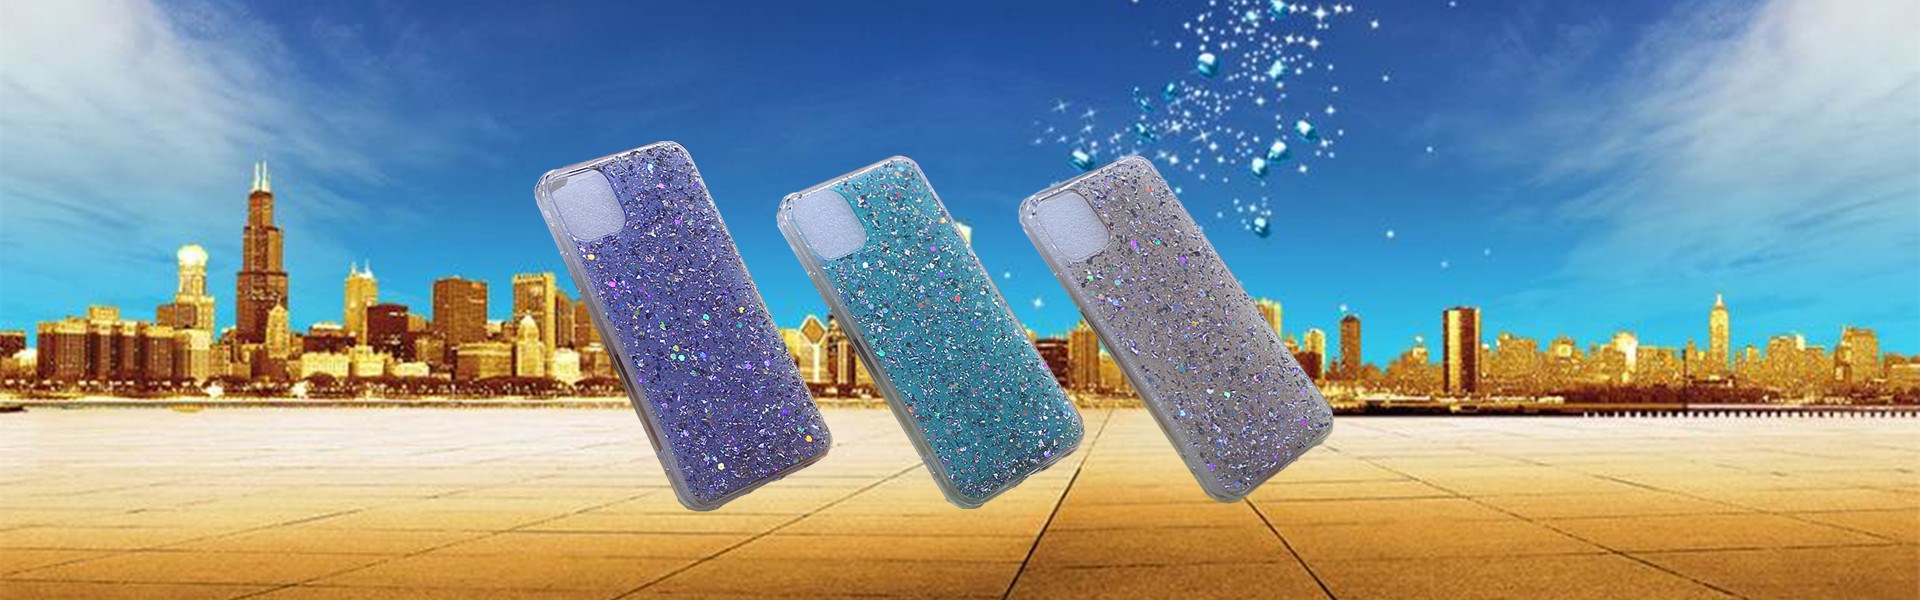 cell phone case,tpu mobile phone covers,tpu+pc cell phone covers,HZY plastic products co.,ltd.